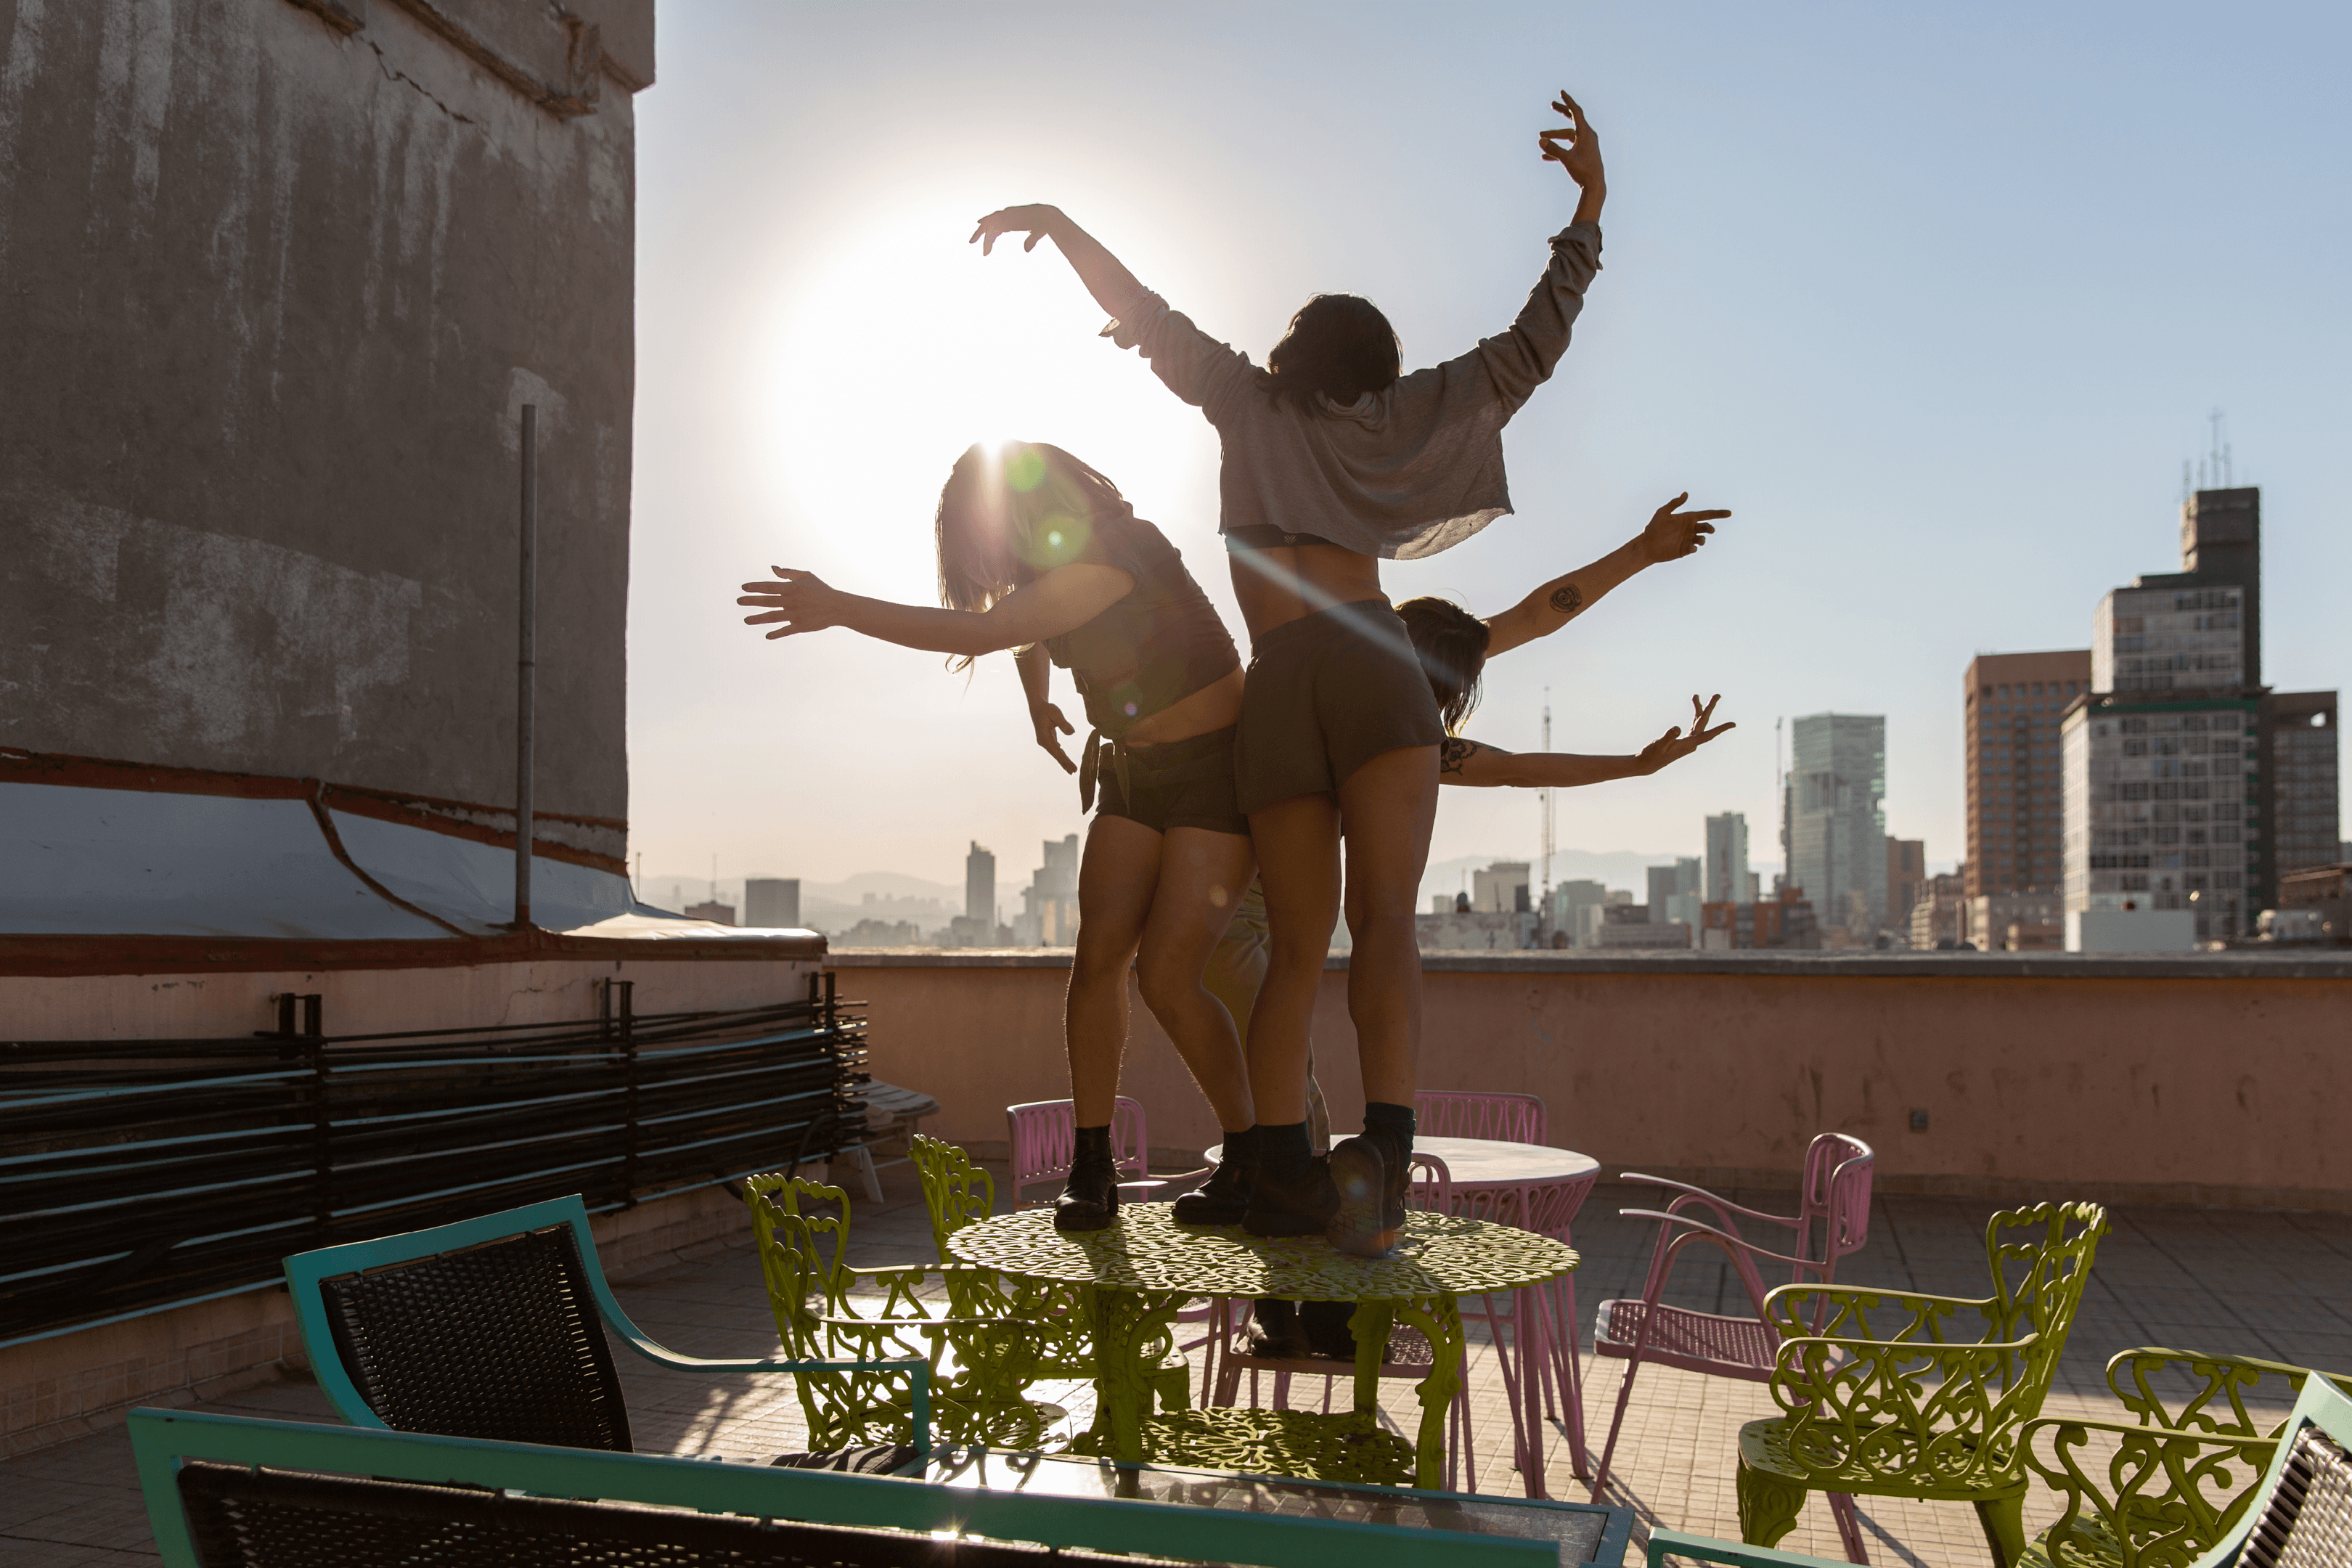 Dancers on Rooftops #111 - Andrea, Marlene and Juliet (Mexico, 2022)